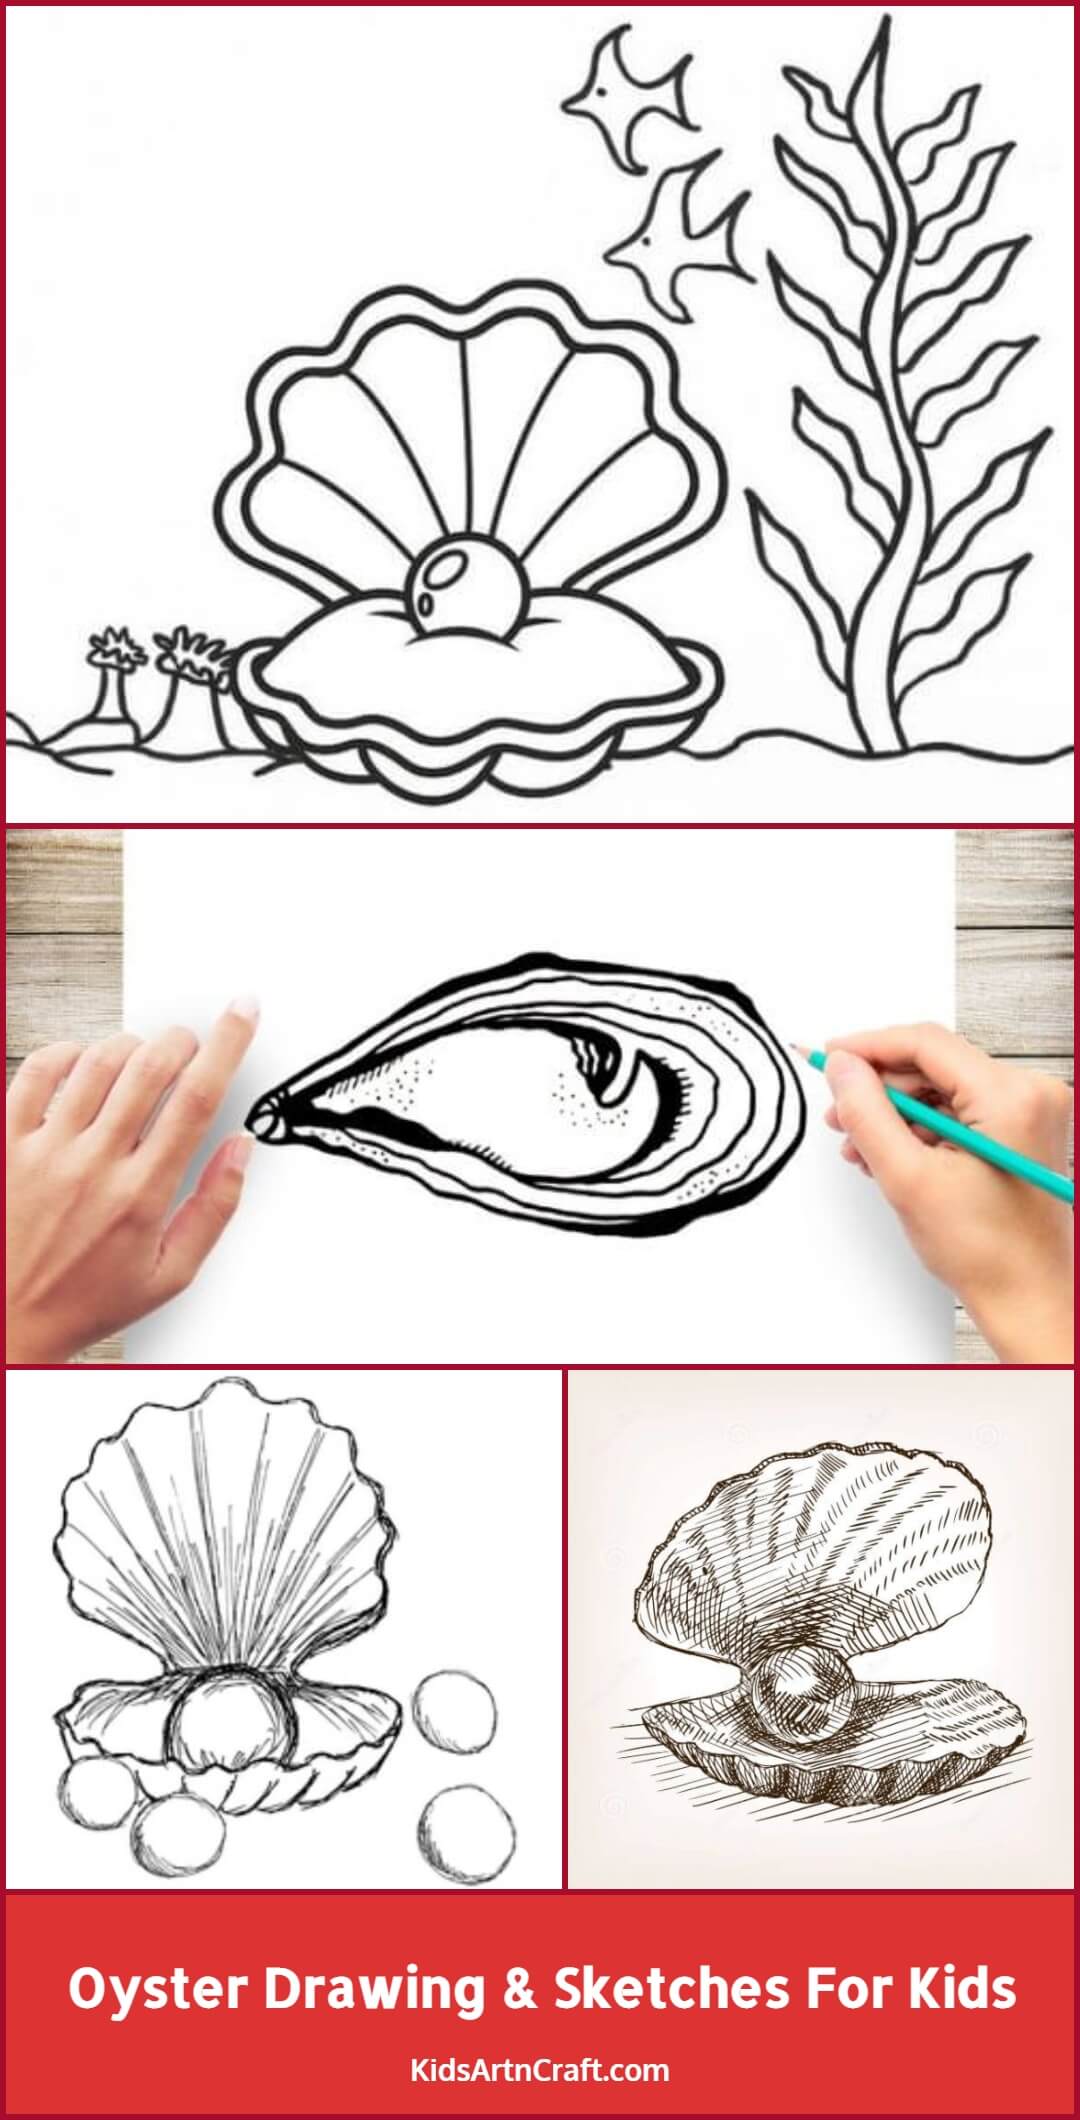 Oyster Drawing & Sketches For Kids